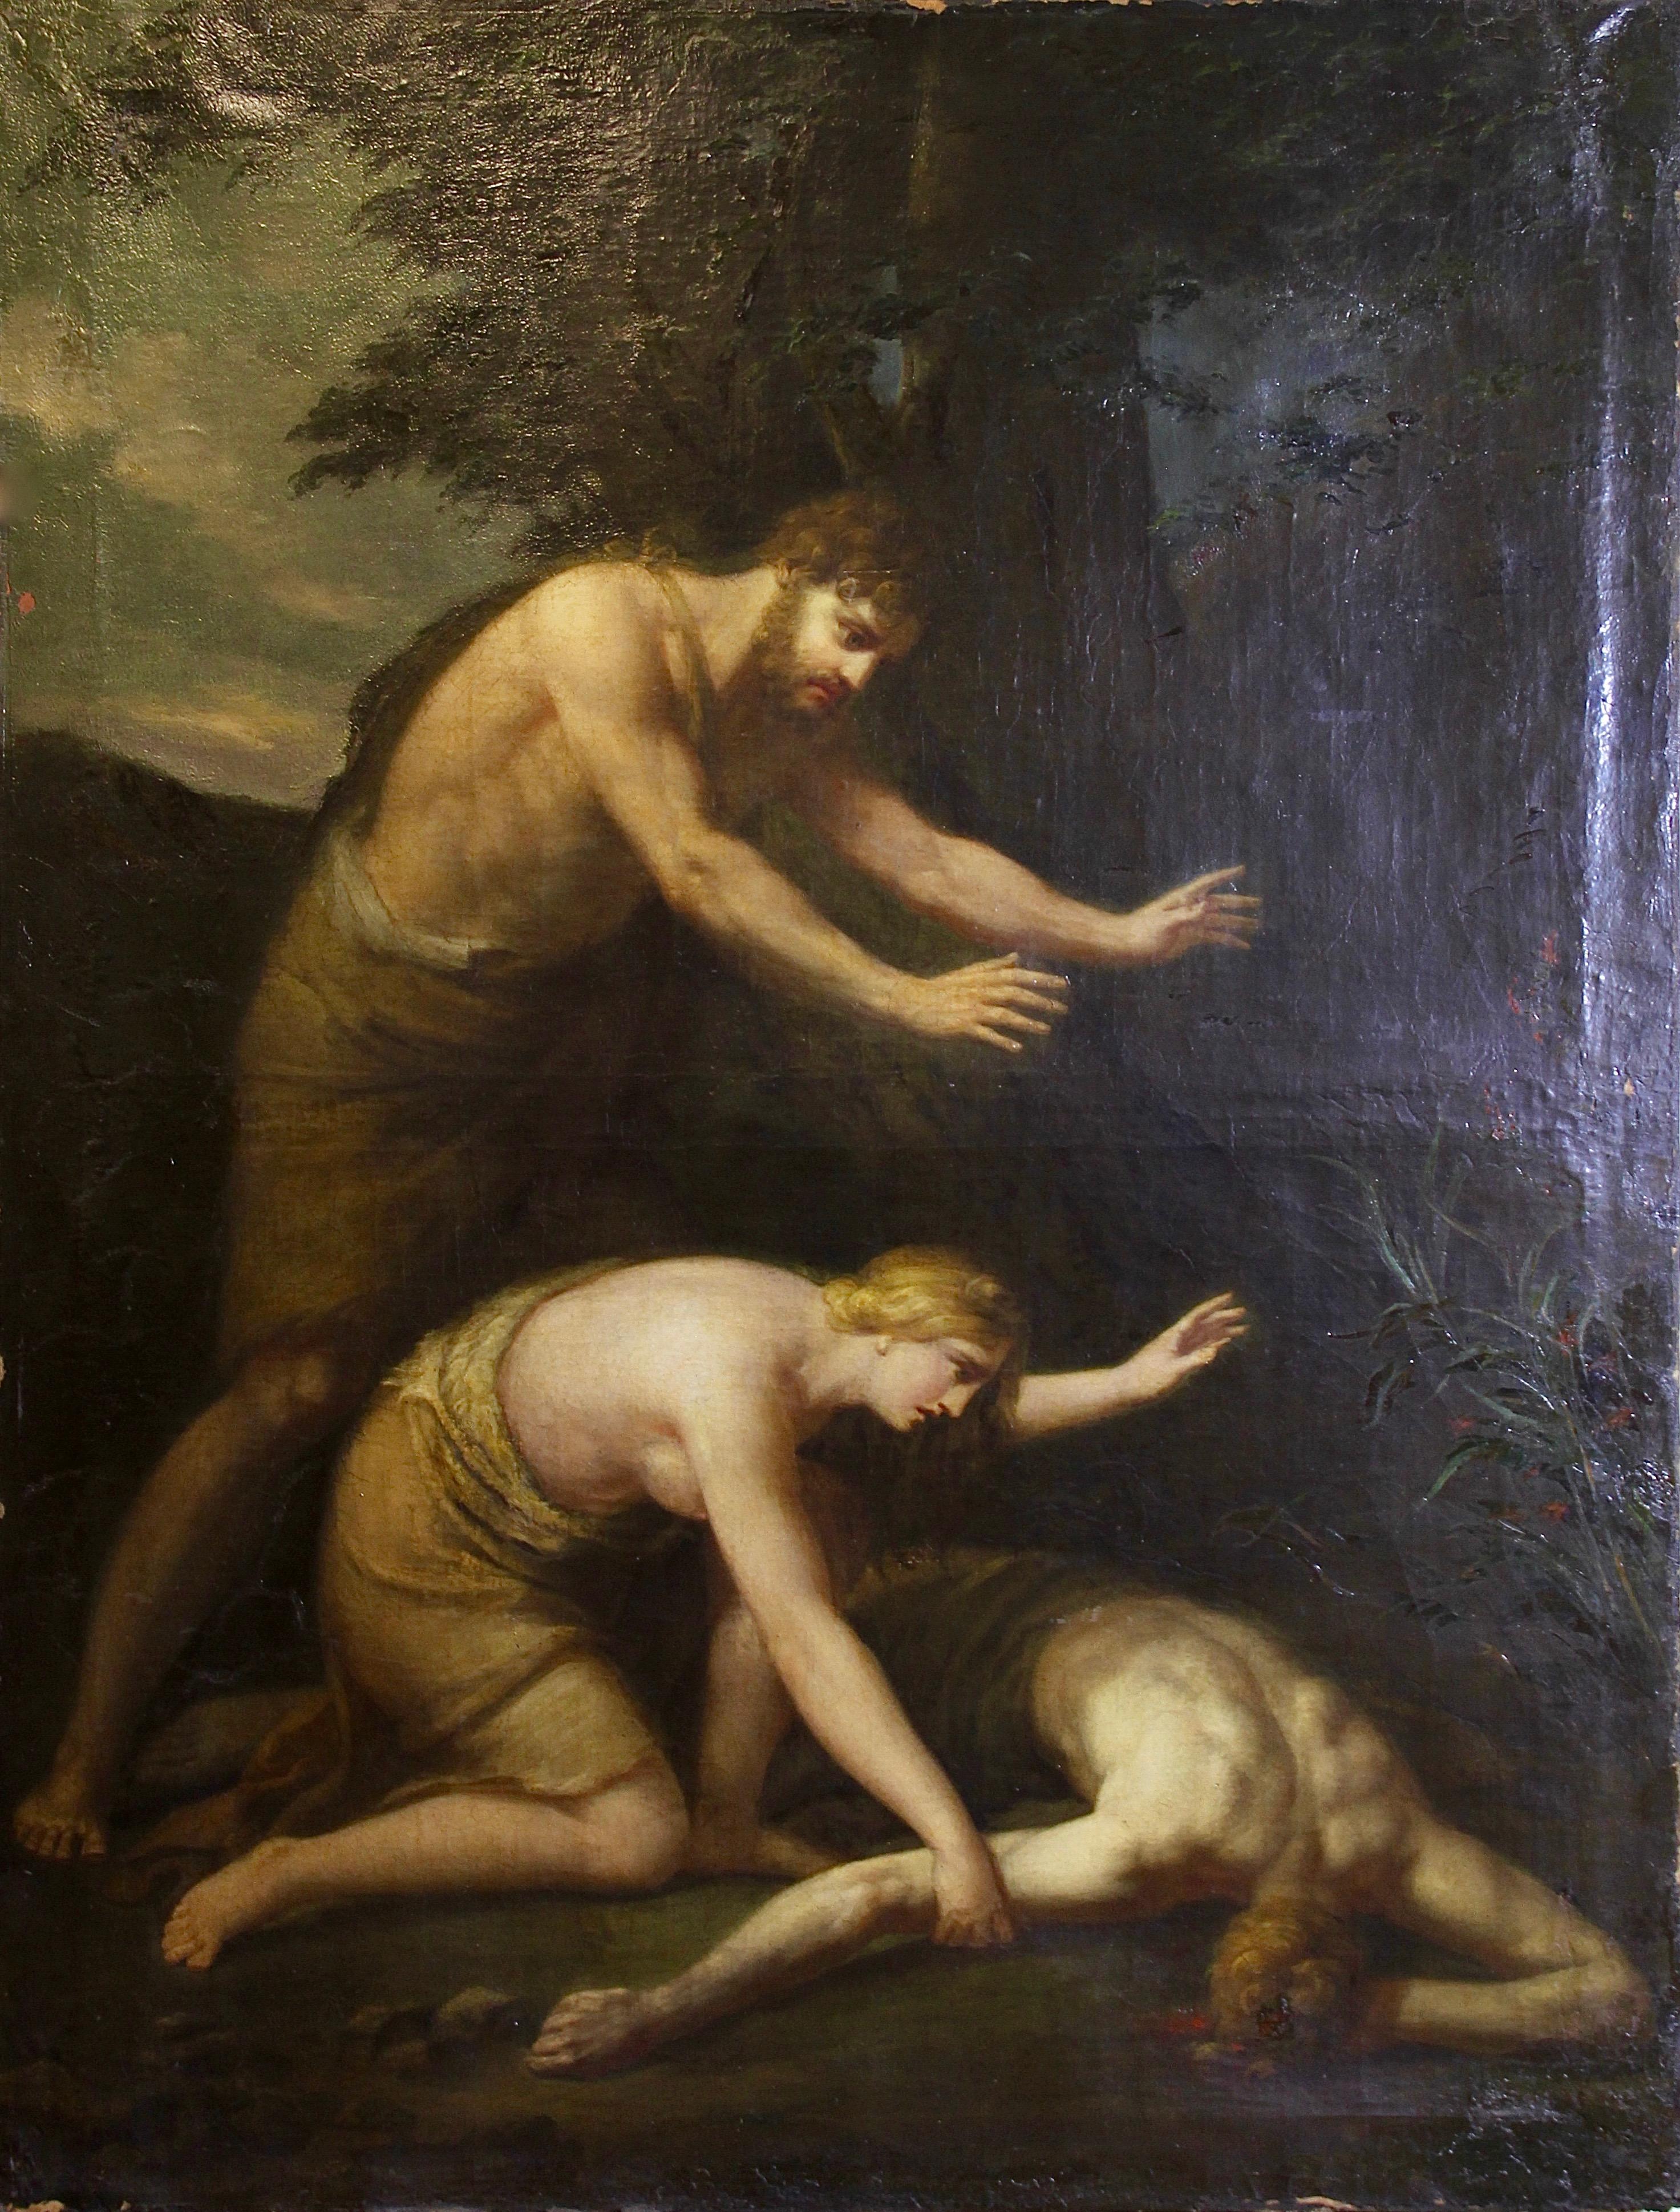 Unknown Figurative Painting - Antique, decorative oil painting, 19th century. "The slain Abel"